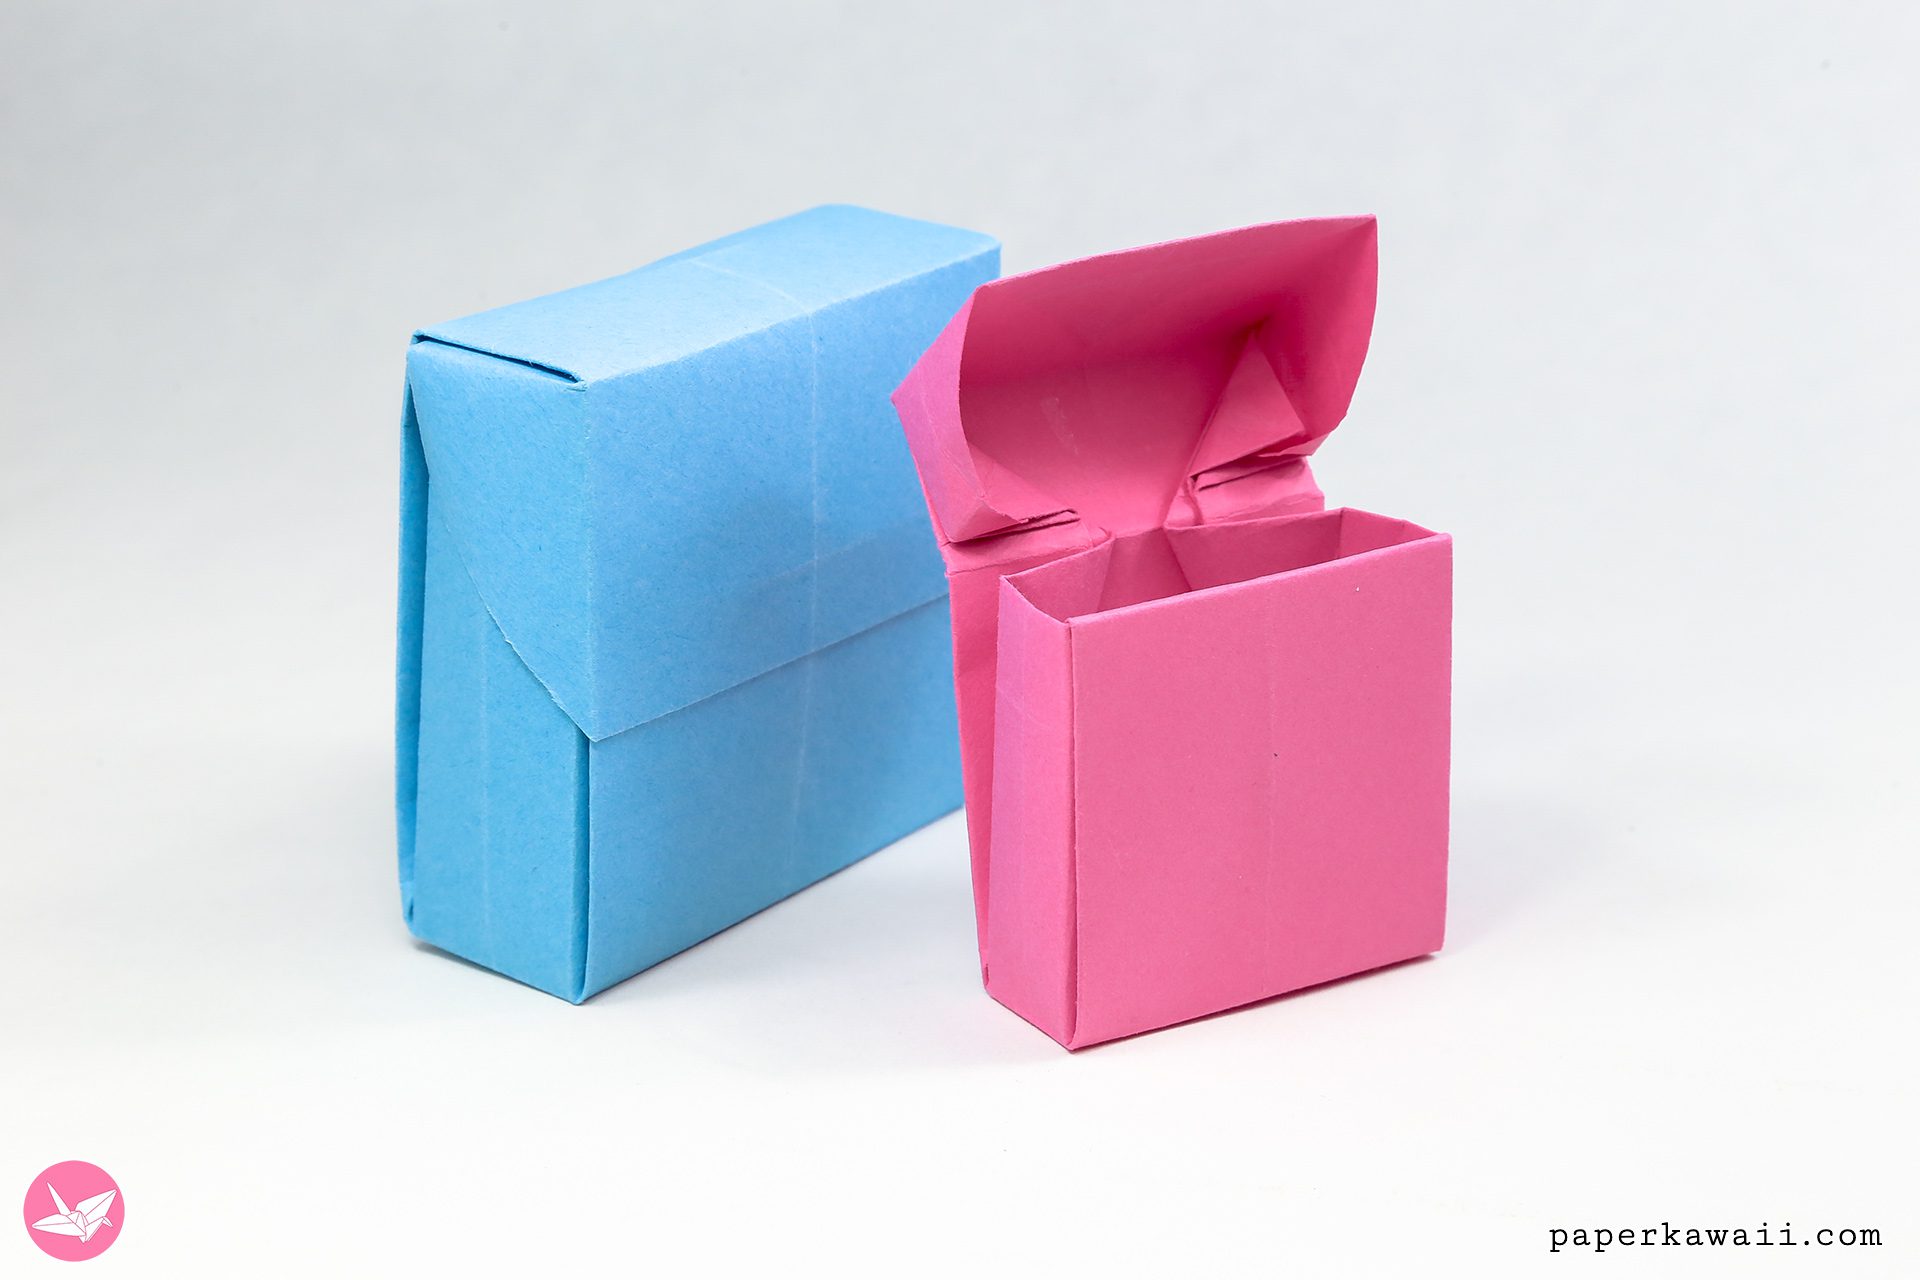 Amazing Origami Boxes: 20 Origami Models with Instructions and Diagrams [Book]